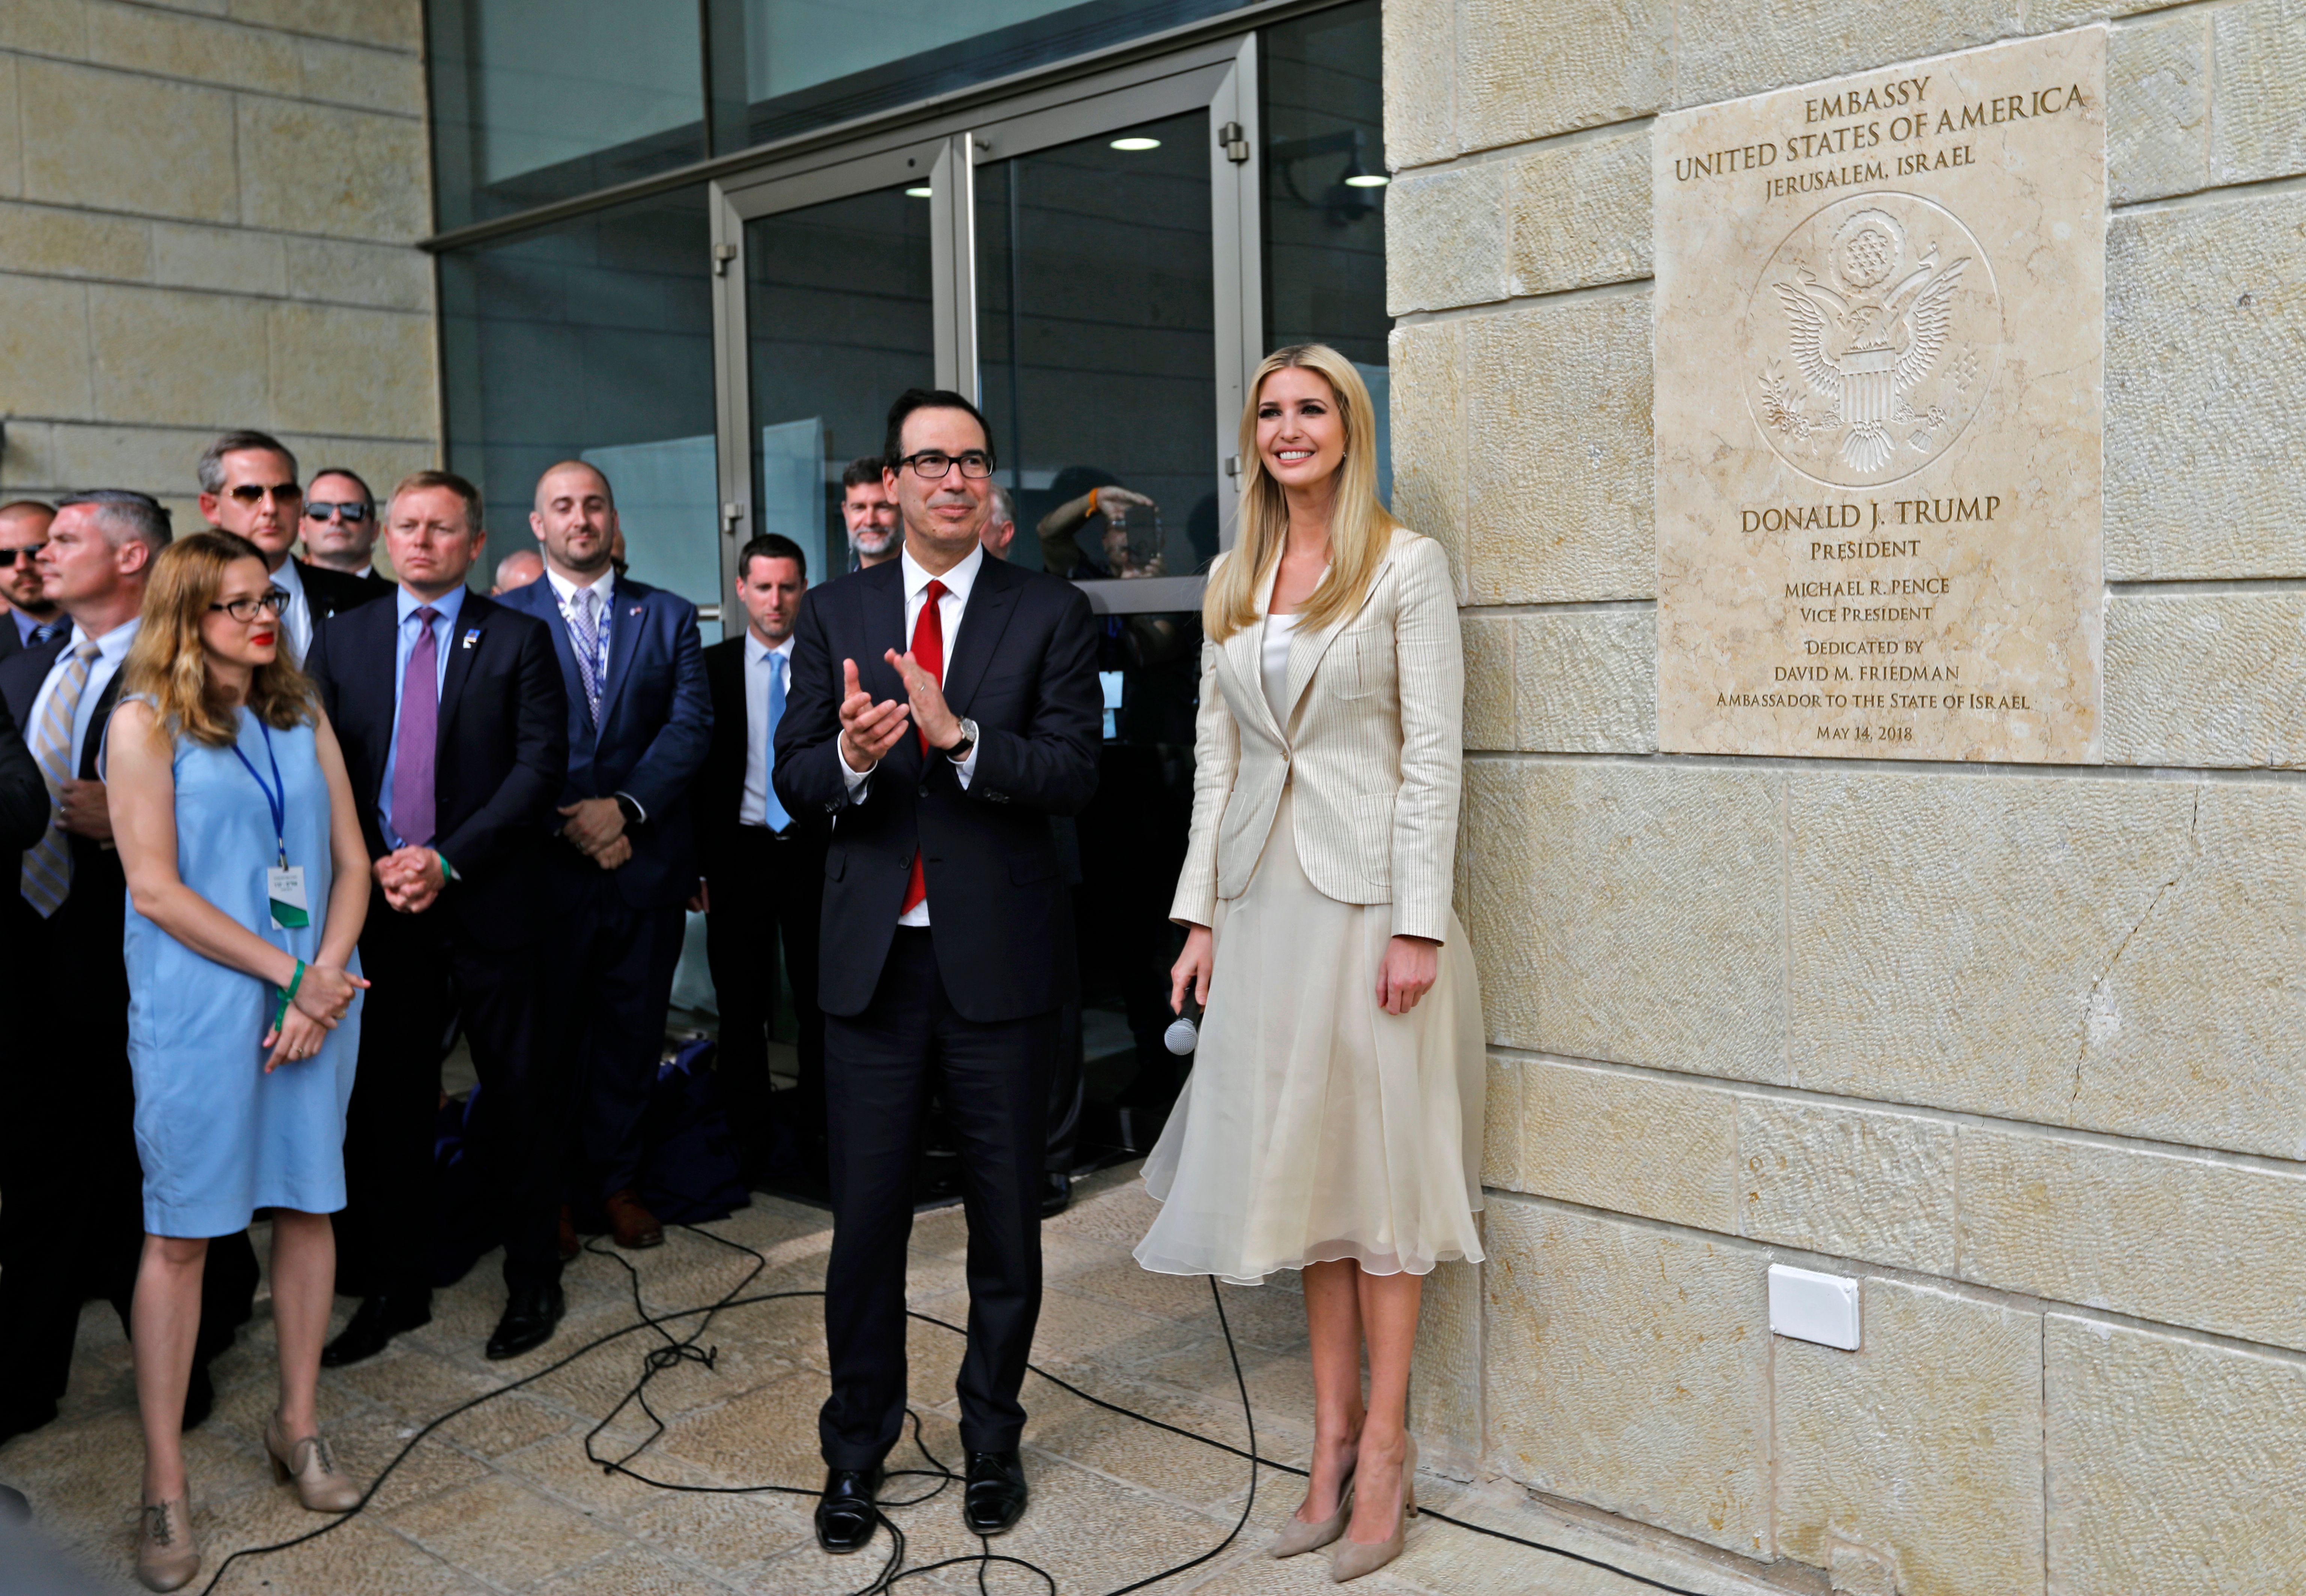 US Treasury Secretary Steve Mnuchin (L) and US President's daughter Ivanka Trump stand next to an inauguration plaque during the opening of the US embassy in Jerusalem on May 14, 2018. - The United States moved its embassy in Israel to Jerusalem after months of global outcry, Palestinian anger and exuberant praise from Israelis over President Donald Trump's decision tossing aside decades of precedent. (Photo by Menahem KAHANA / AFP) (Photo credit should read MENAHEM KAHANA/AFP/Getty Images)